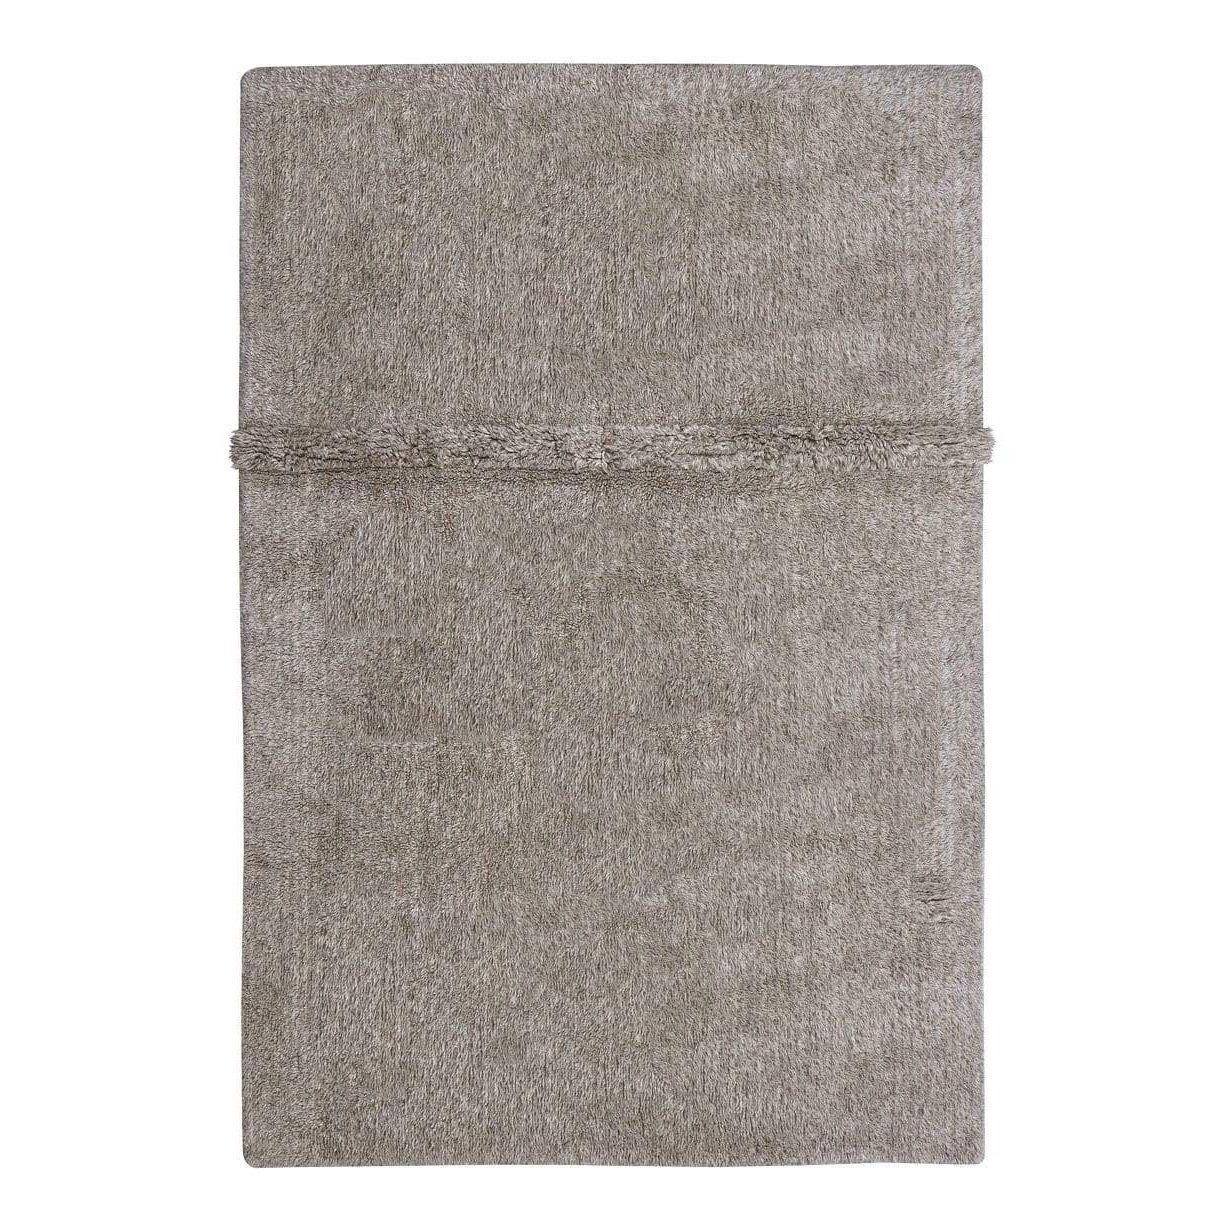 Lorena Canals Tundra Blended Grey Woolable Area Rug